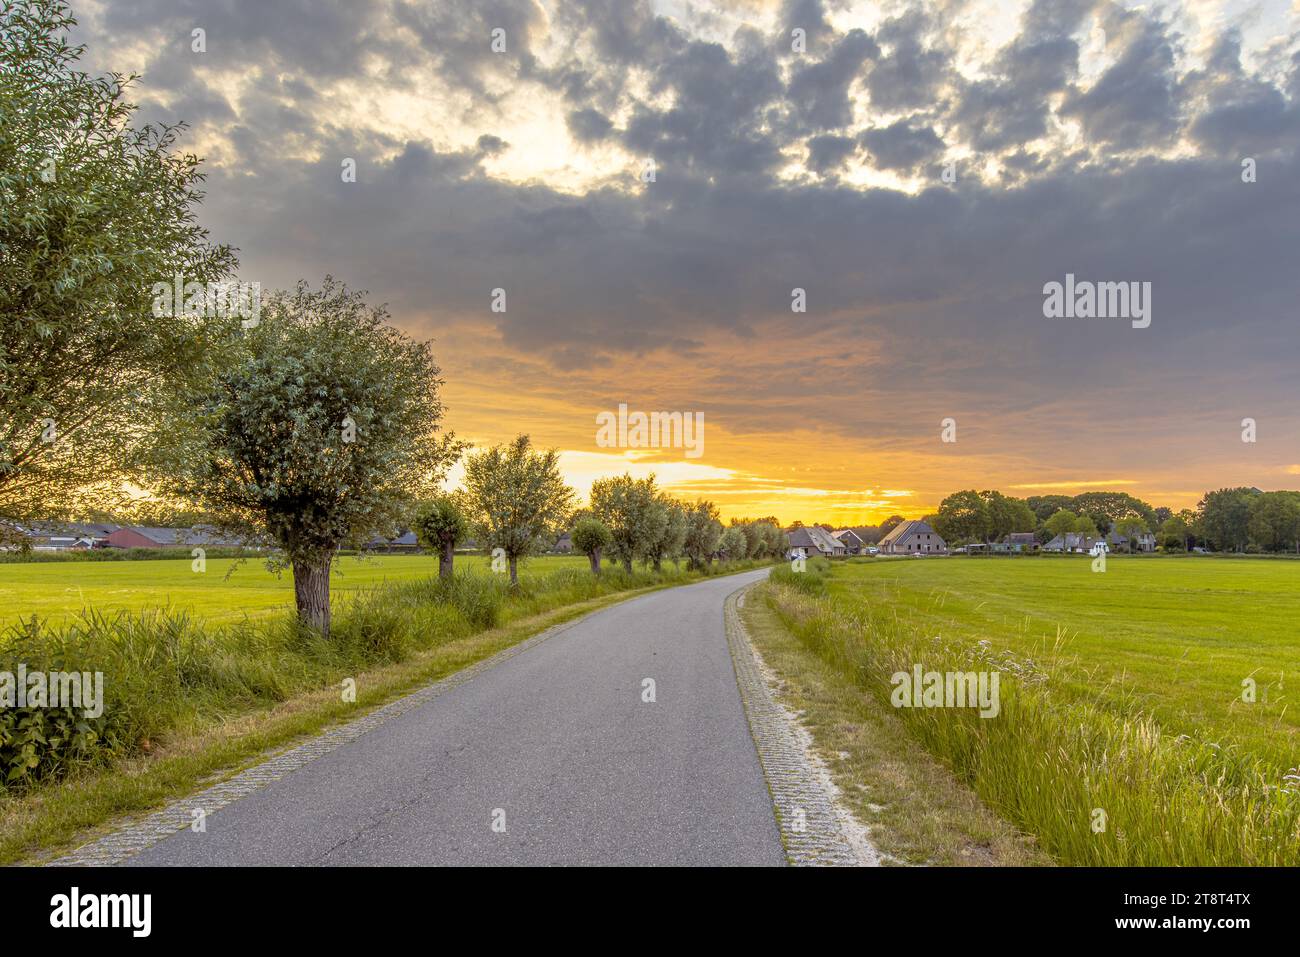 Dutch Village Landscape with Pollard Willows and old farms in the distance. Landscape scene of Nature in Europe. Weerribben, Overijssel, Netherlands. Stock Photo